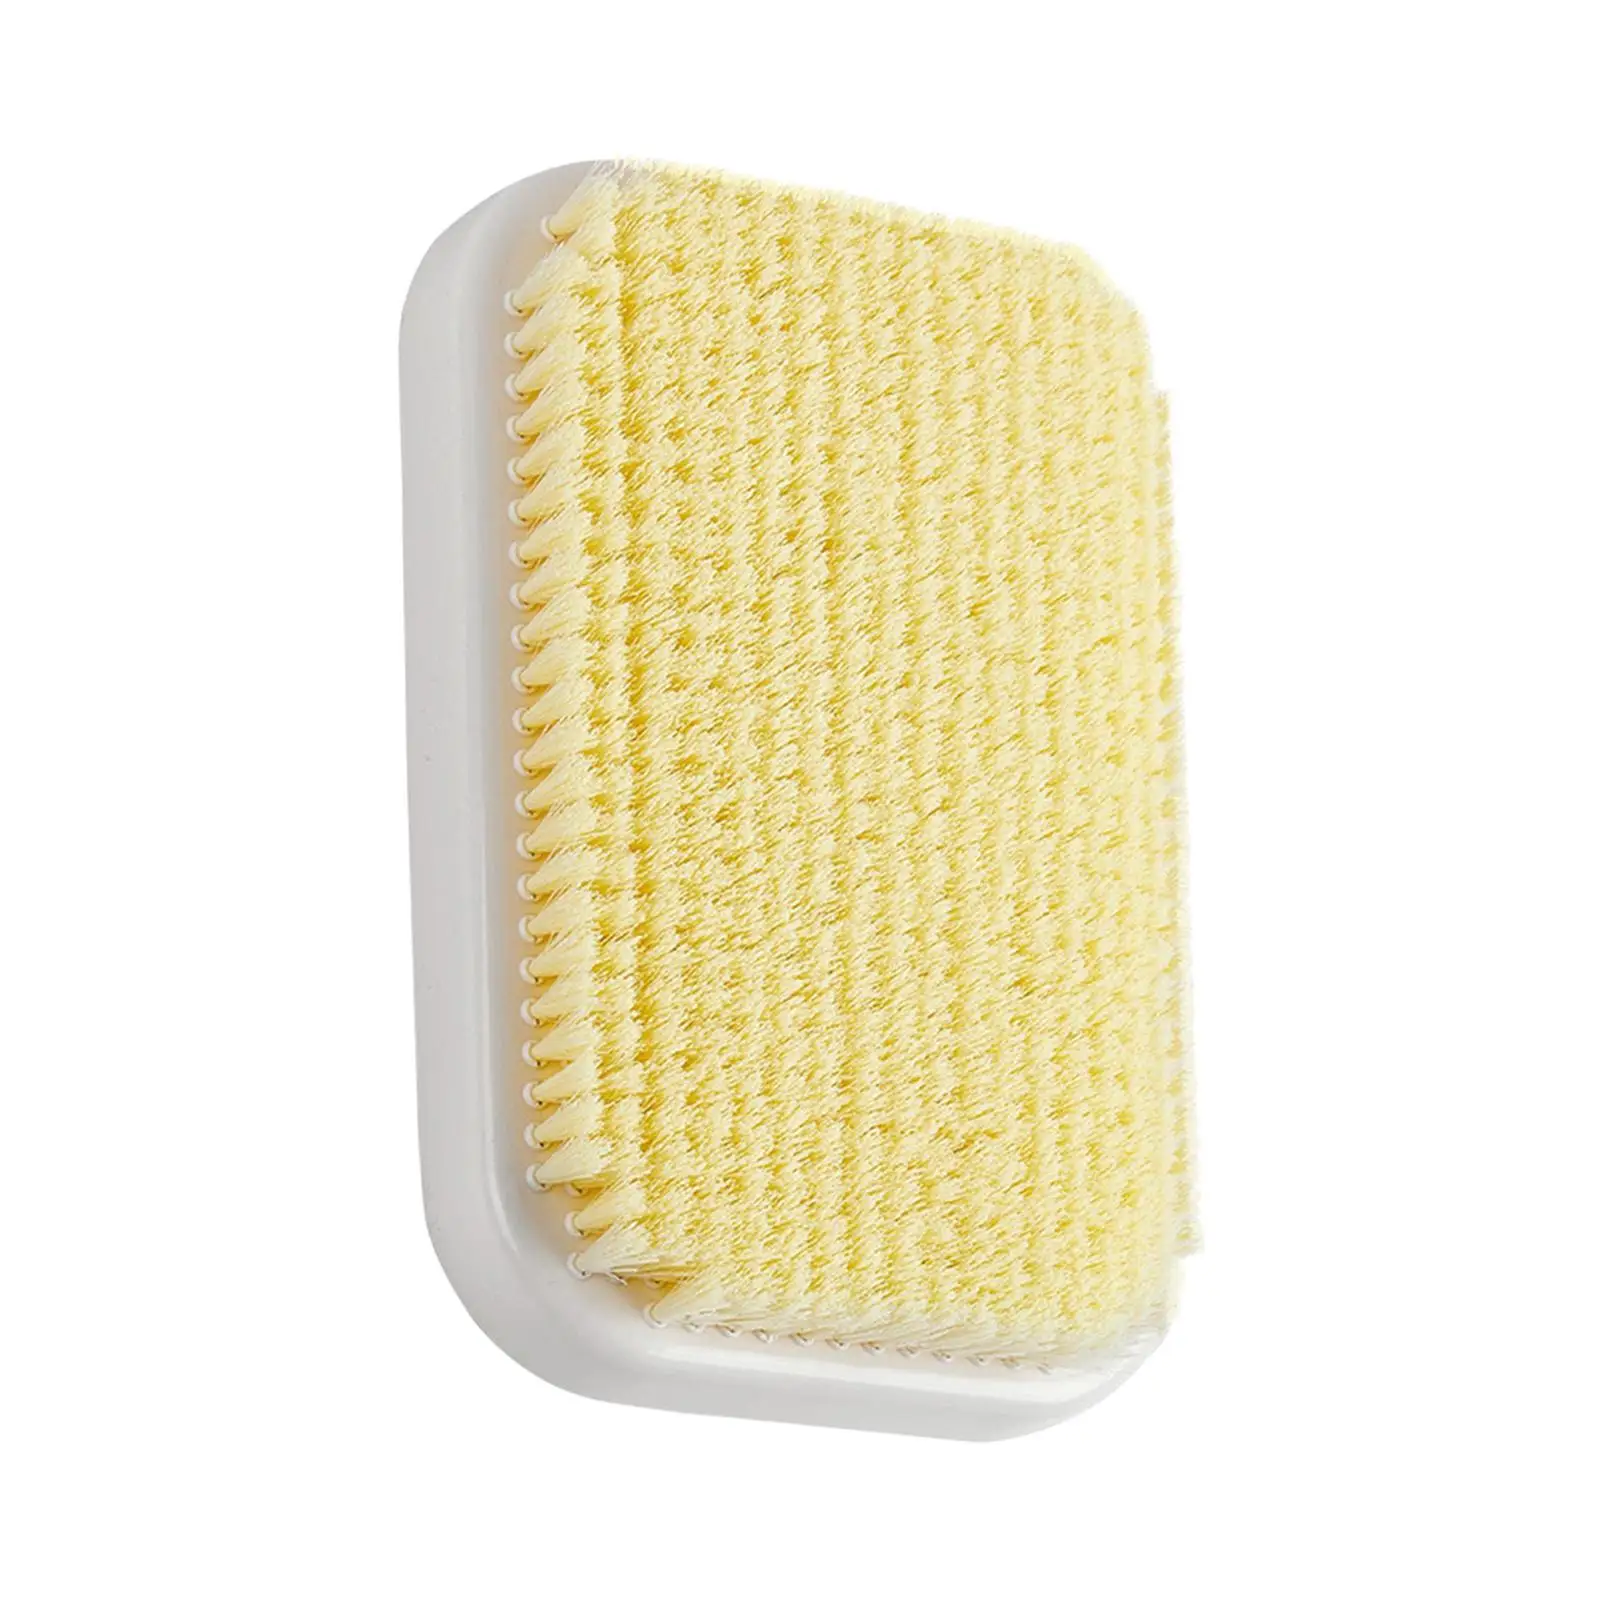 Back Brush Wall Mounted Accessories Nylon PP Cleaning Tool for Bathroom Shower